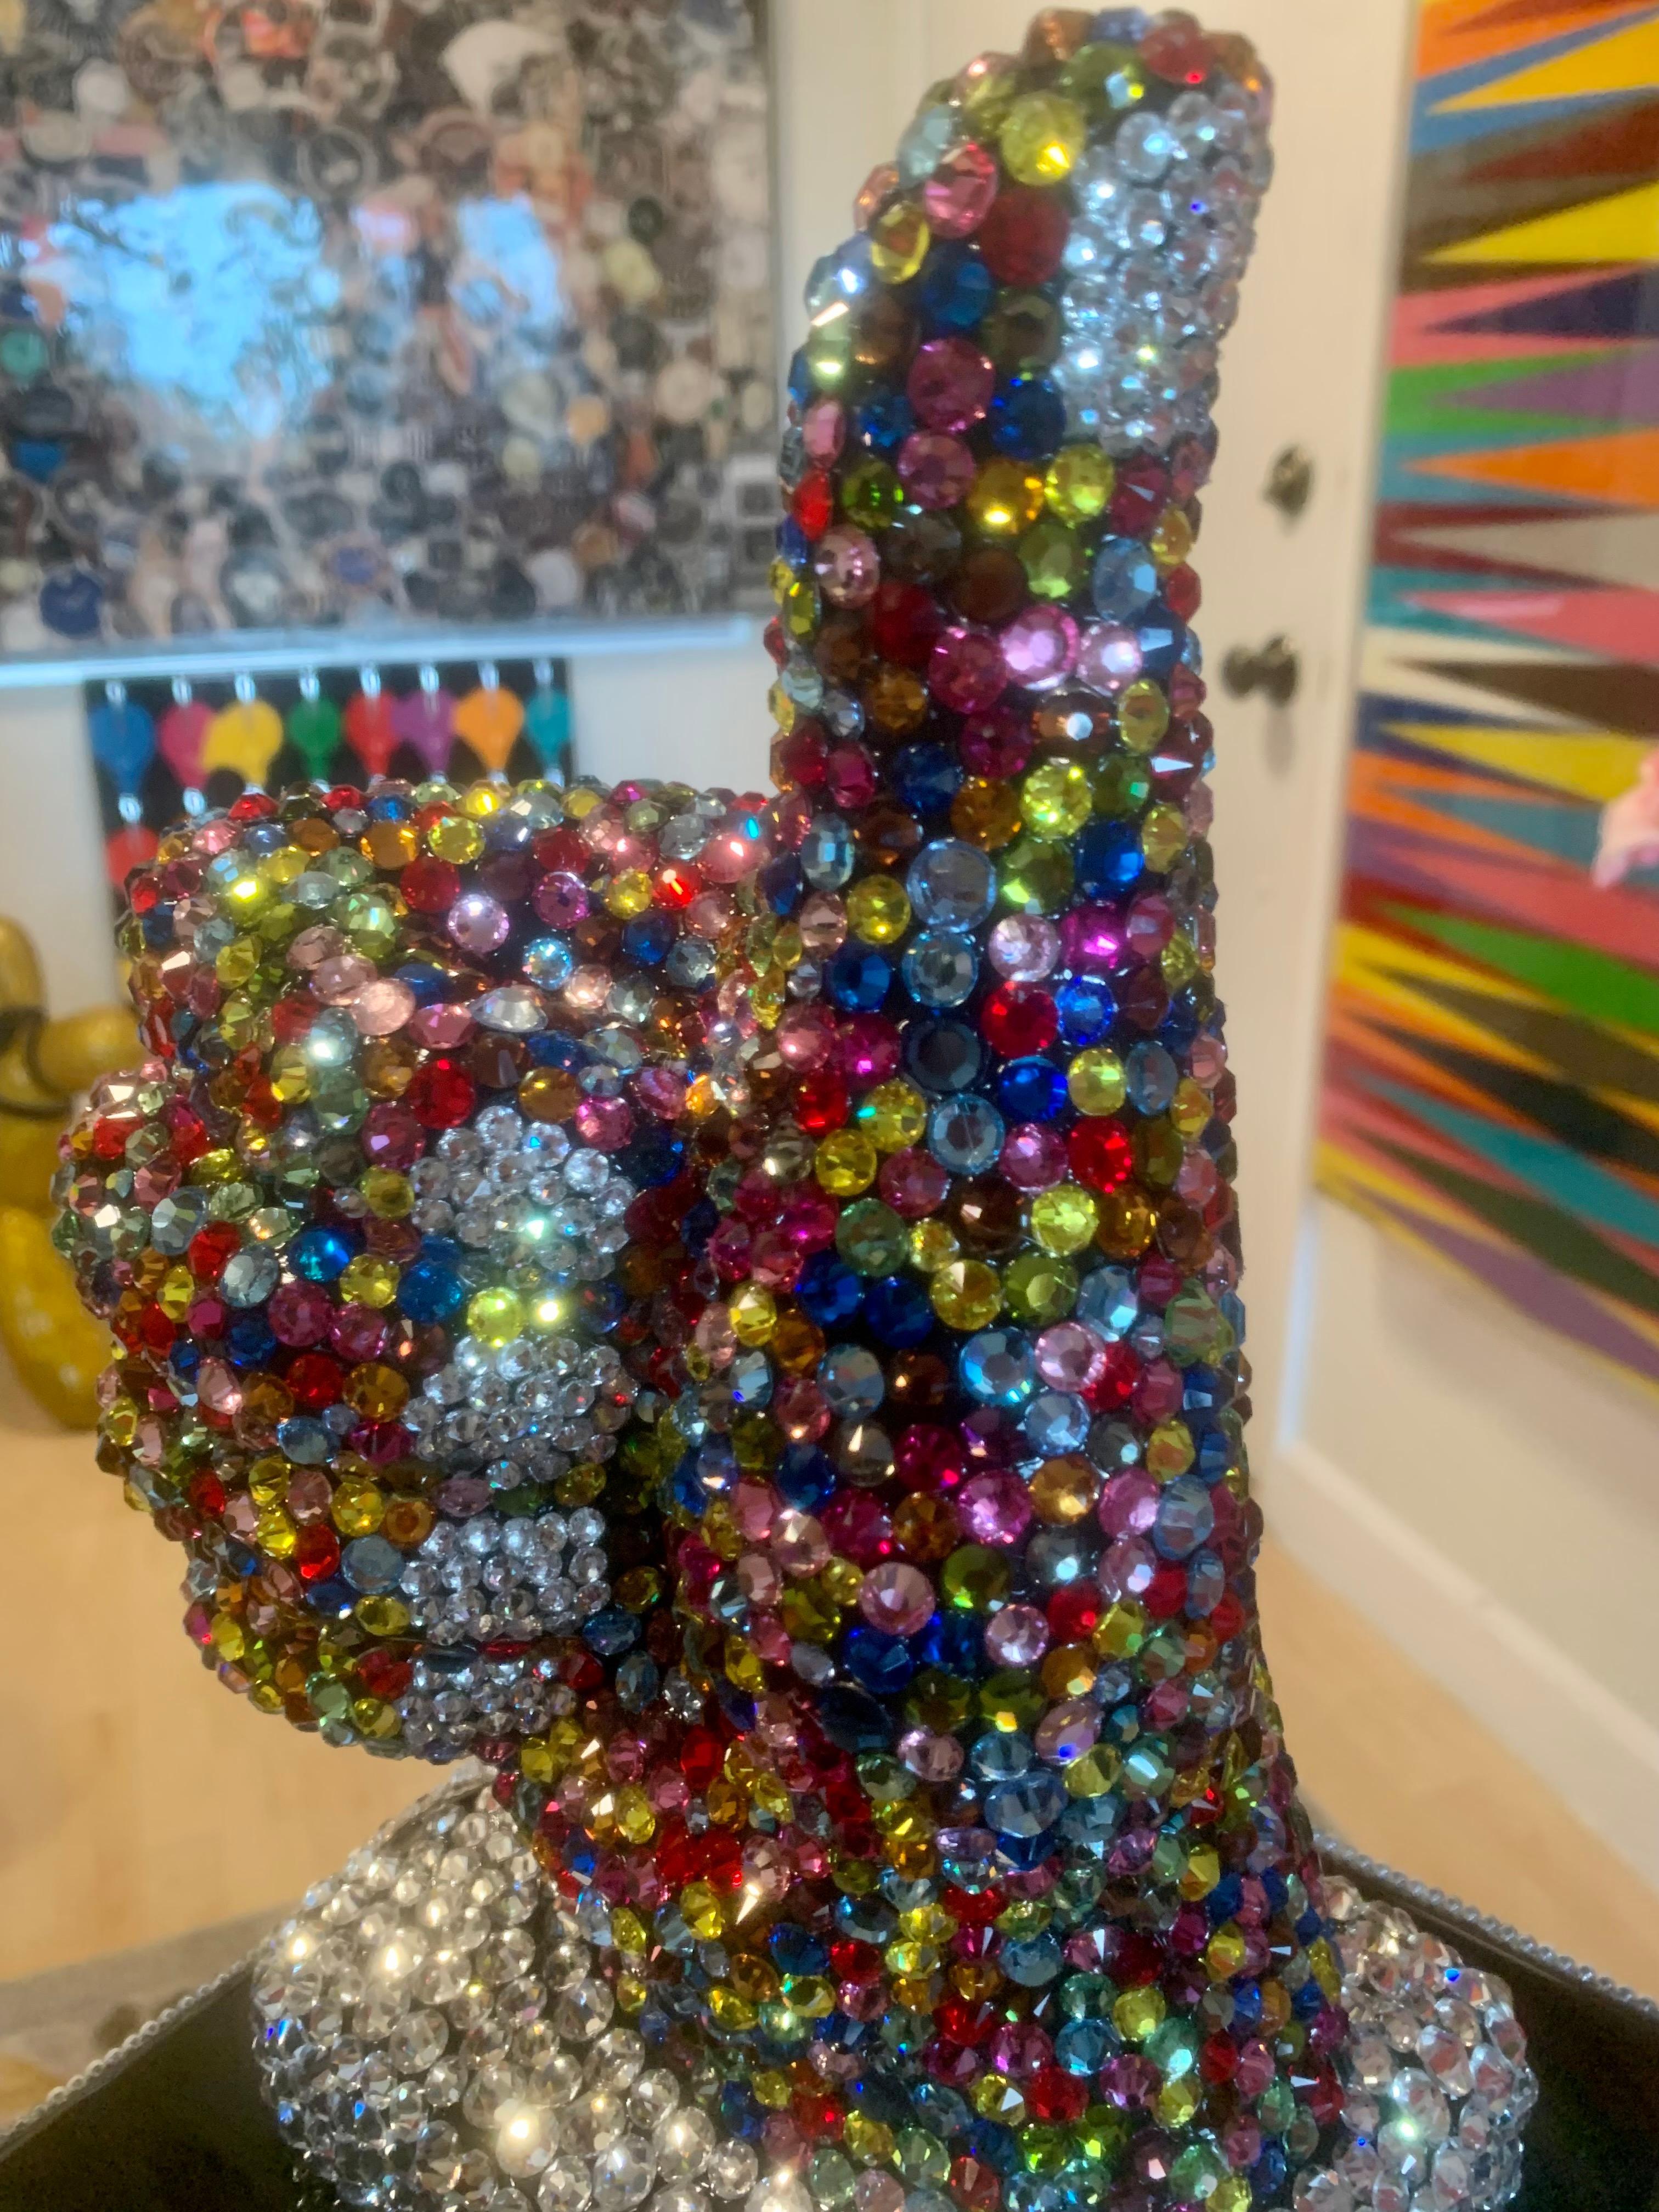 THUMBS UP FOR LIFE (One of a Kind Swarovski Mixed Media Sculpture) 2